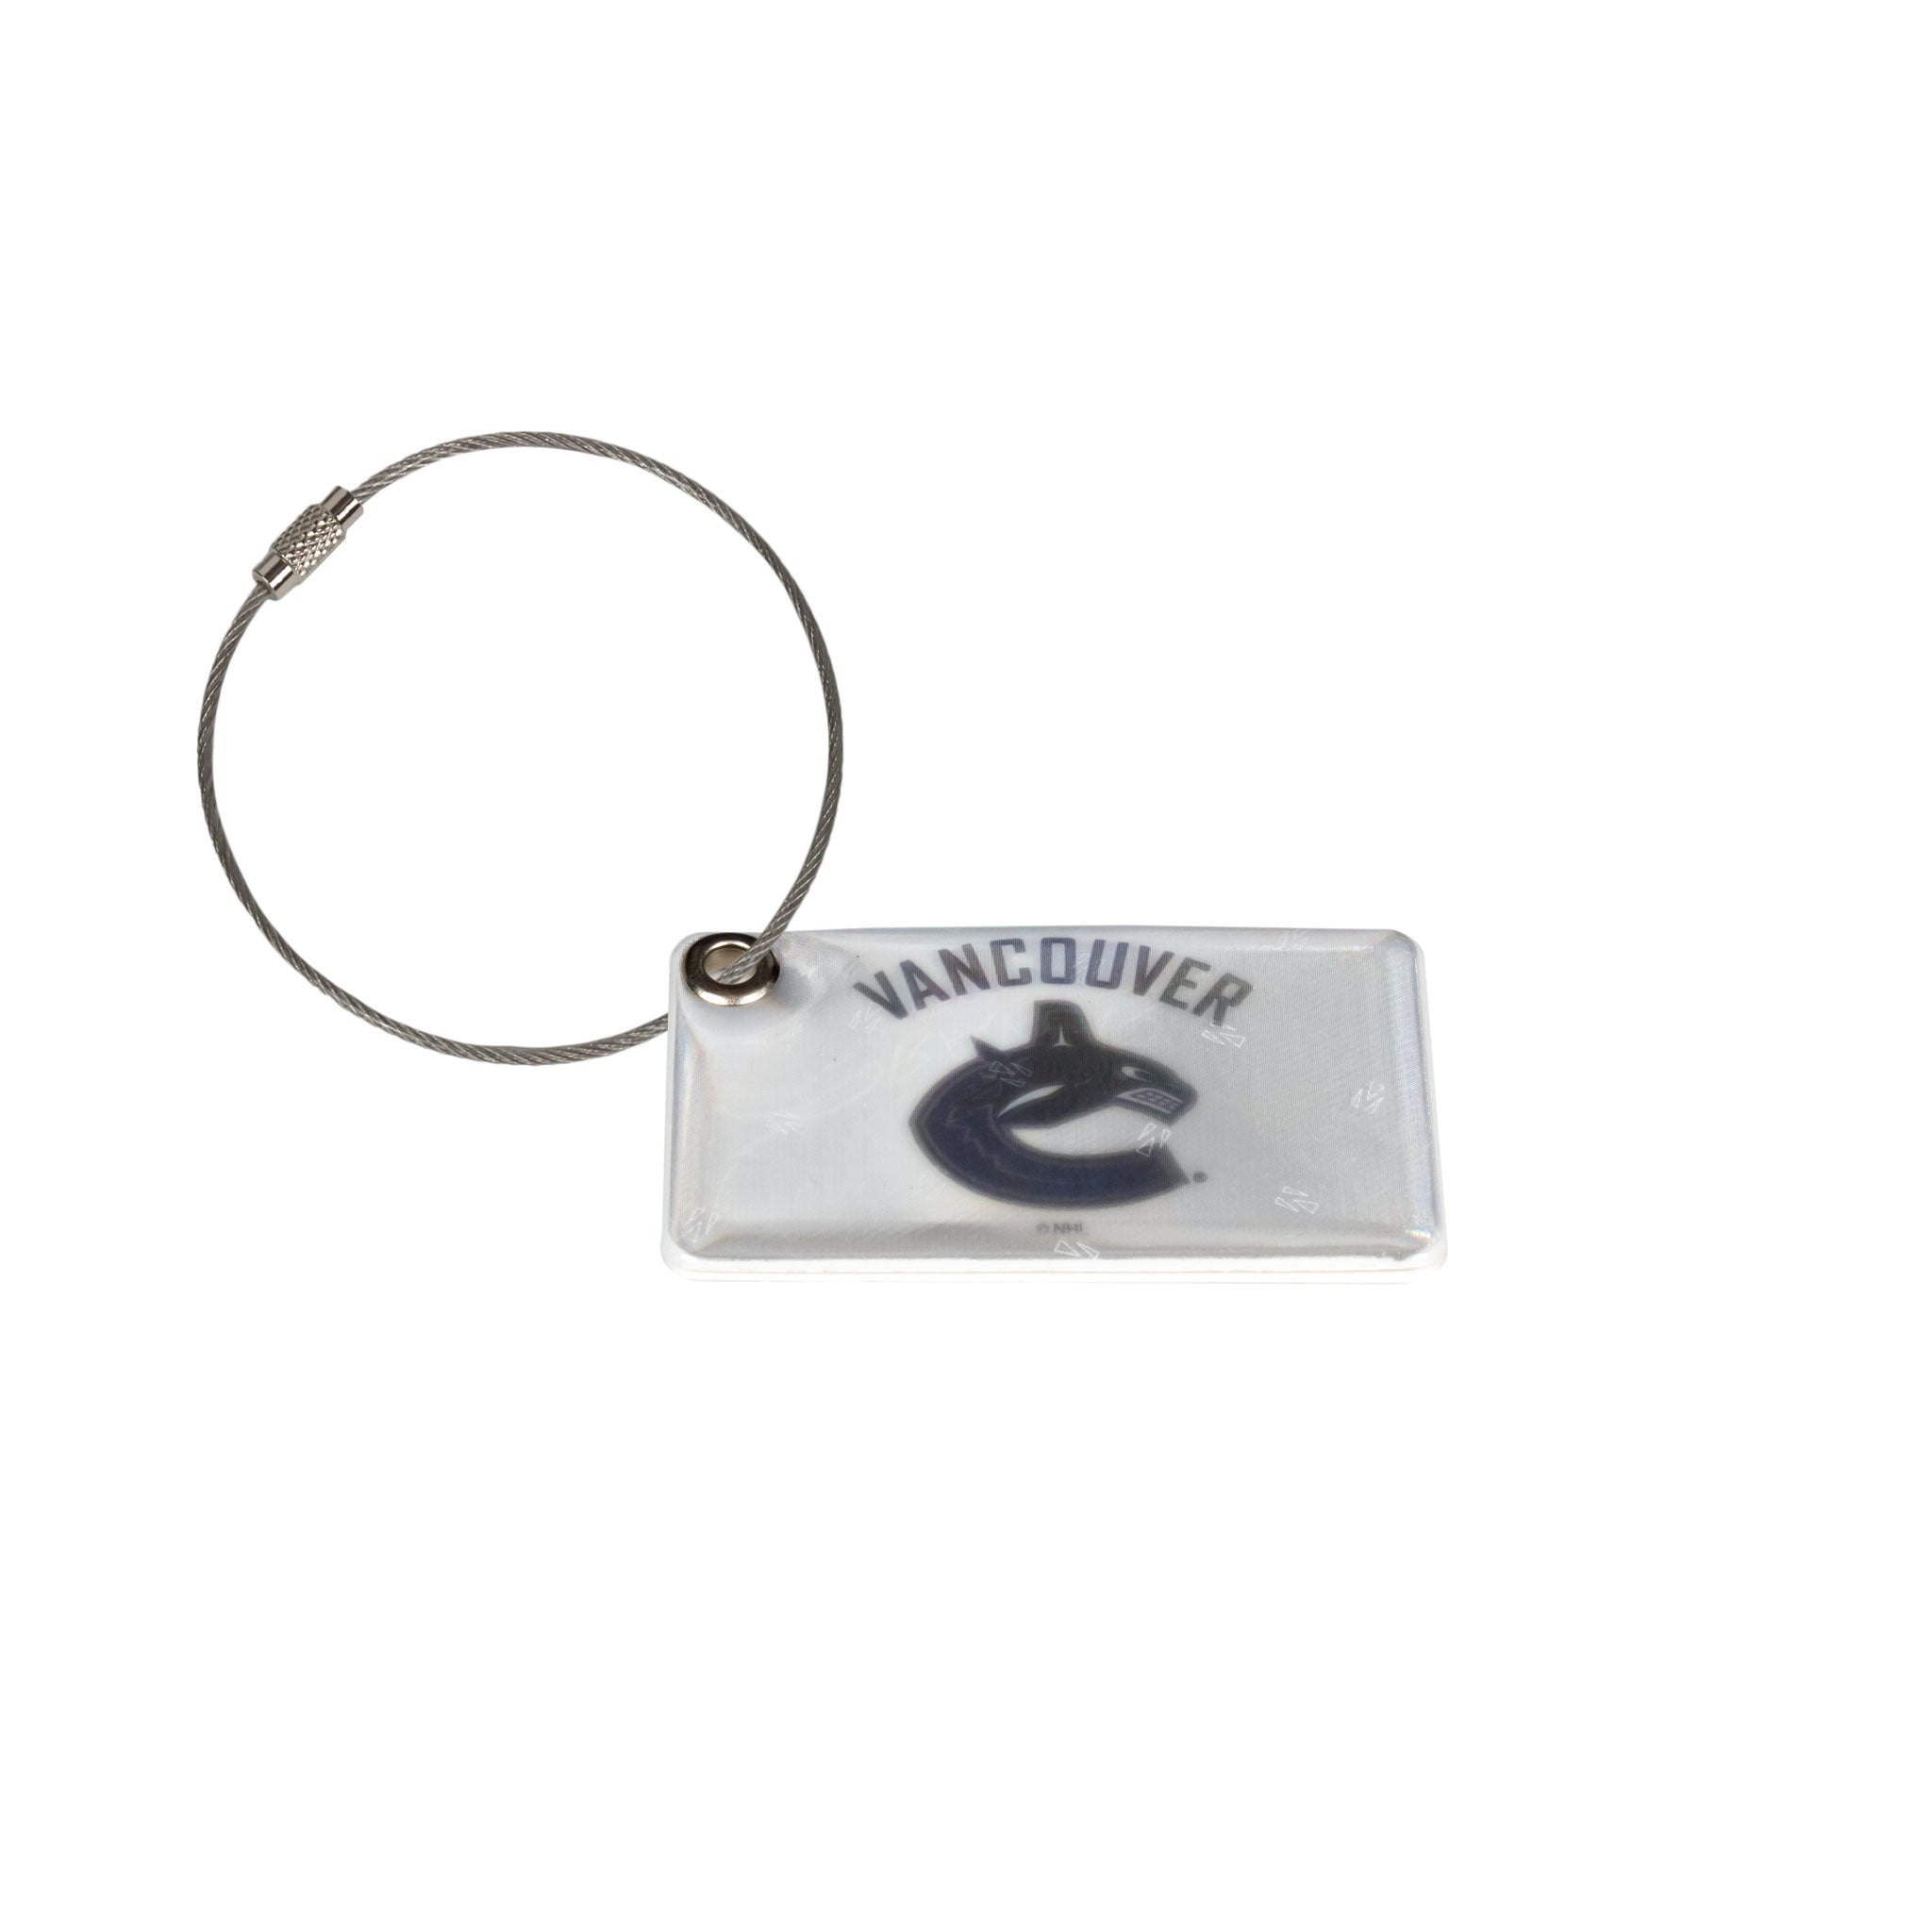 Vancouver_Cancuks_Luggage_Tag_Closed